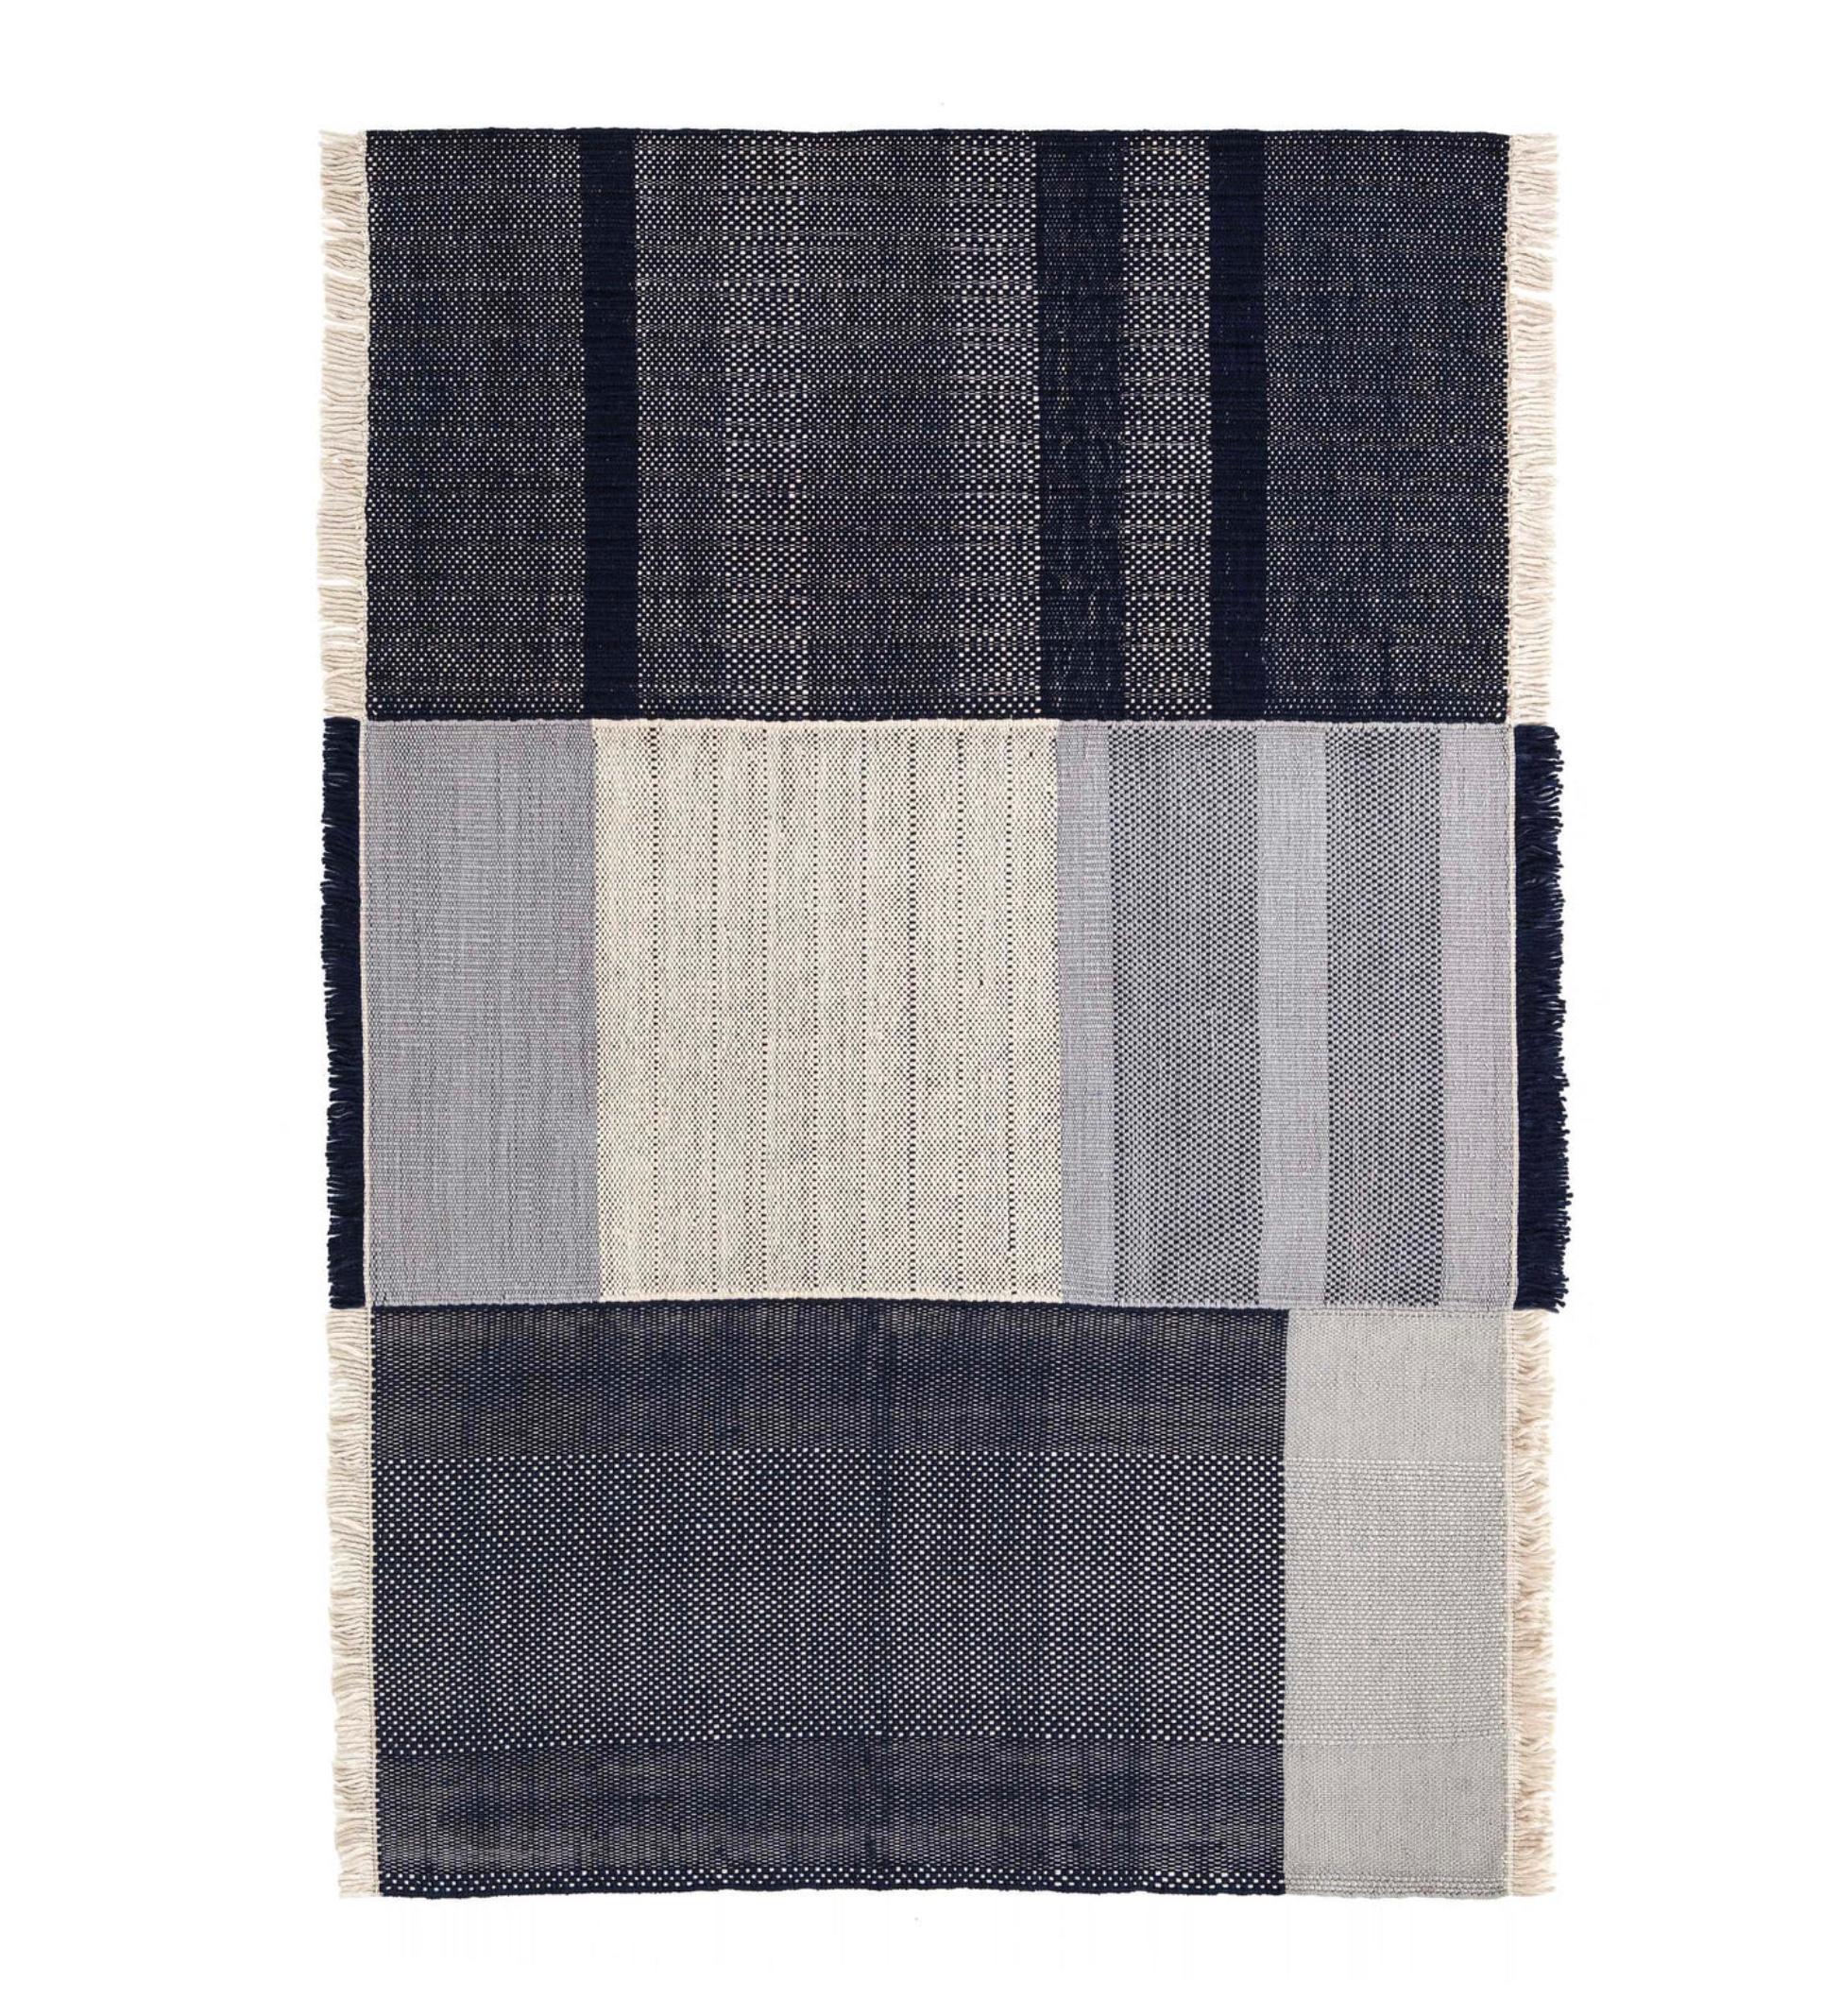 Nani Marquina & Elisa Padrón 'Tres' Outdoor rug. Current production, Spain. Measures: 250x350cm

Tres Outdoor aims to transfer the warmth of the iconic Tres collection to the outdoor world. Made from 100% recycled PET, a material produced through